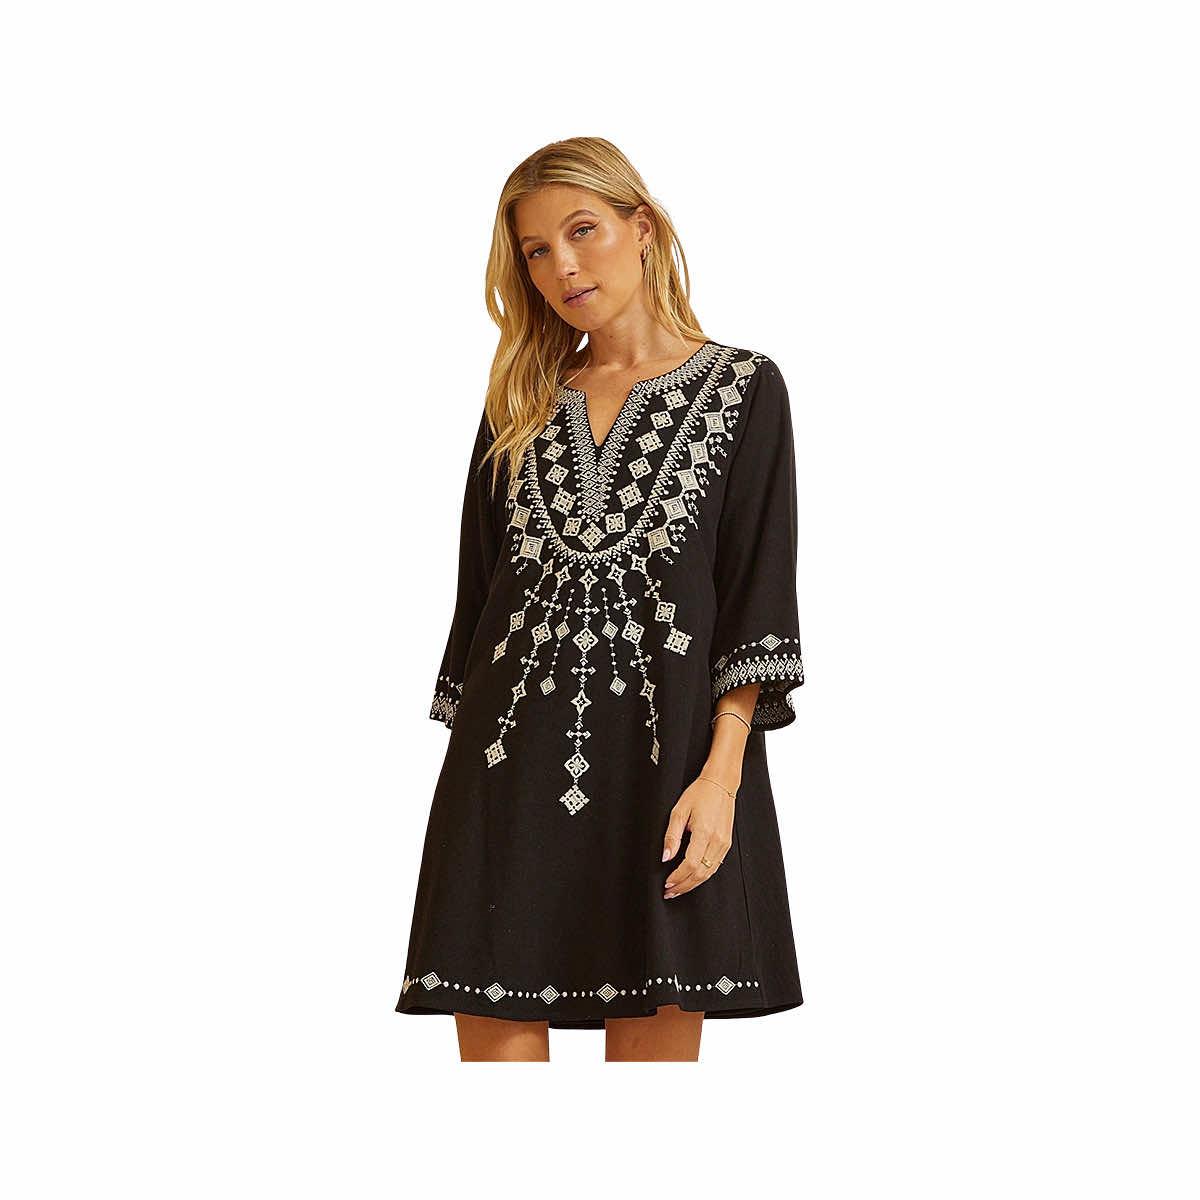  Women's Embroidered 3/4- Sleeve Dress